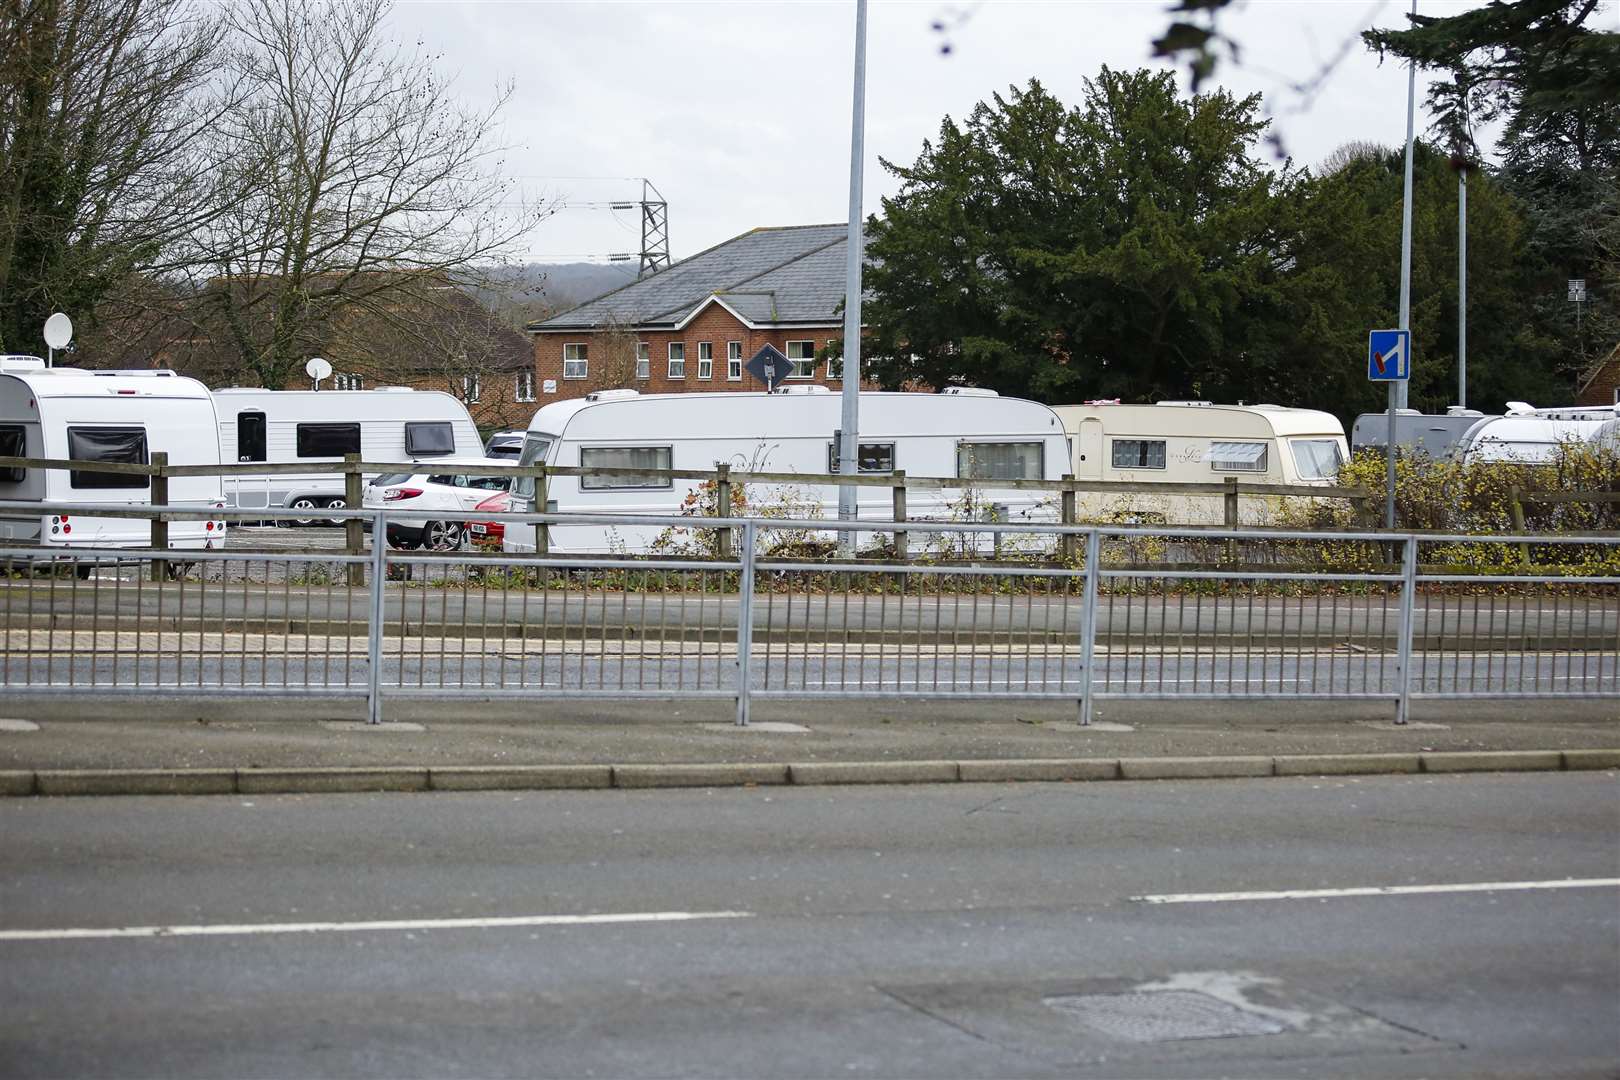 Travellers set up camp in the car park on Sittingbourne Road